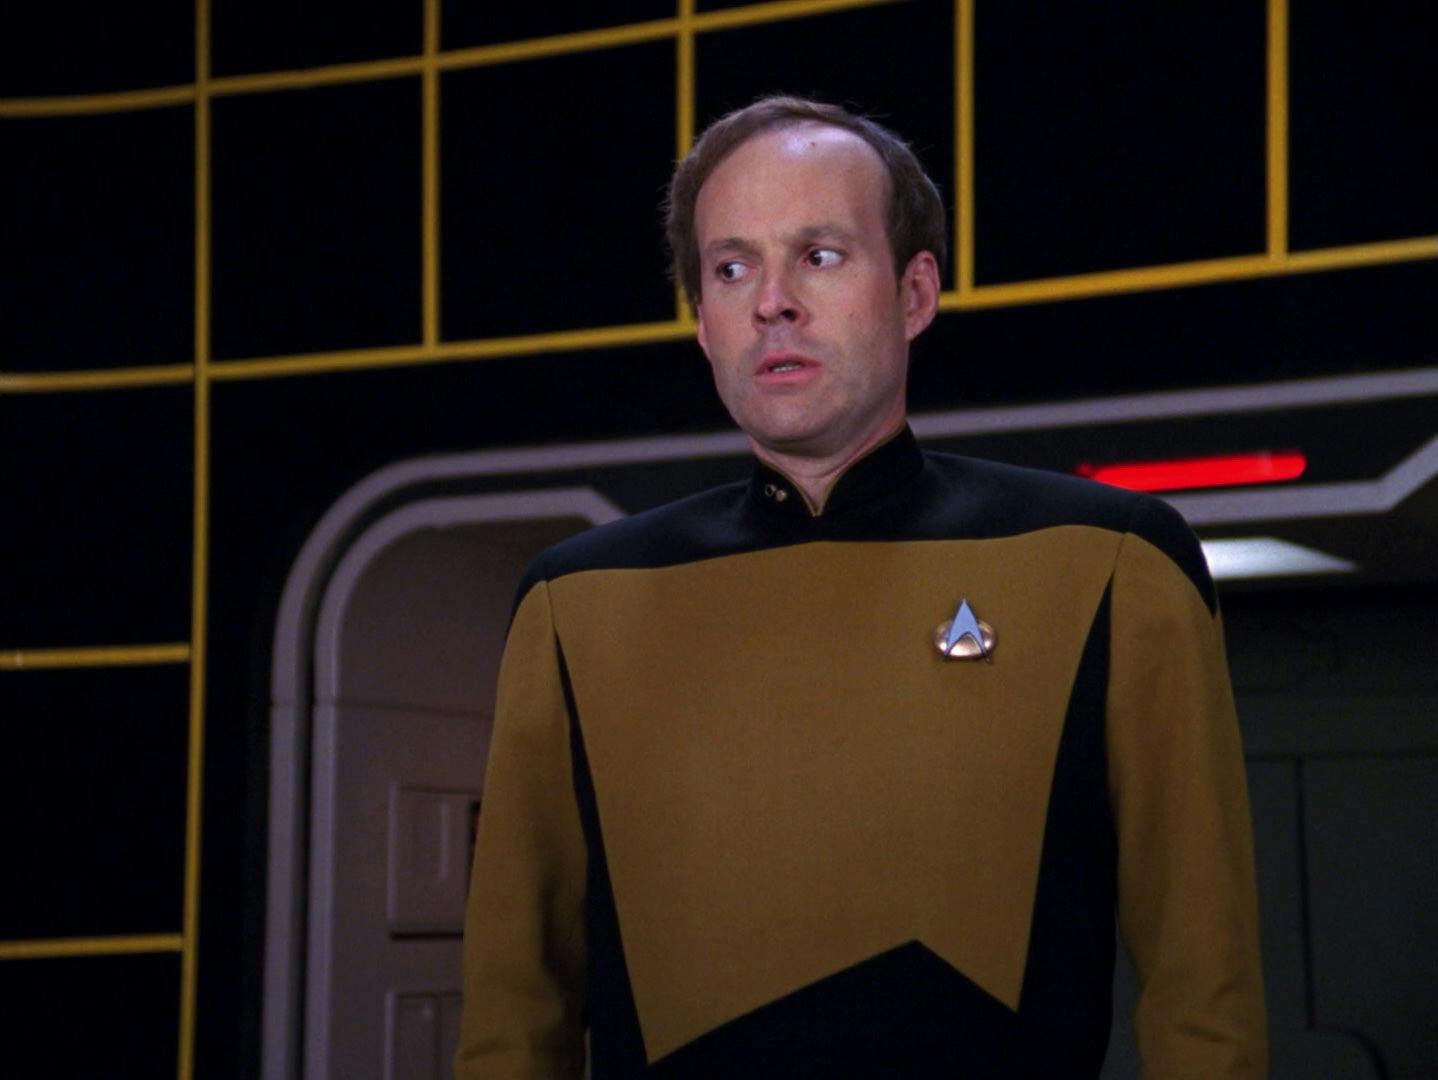 Star Trek: The Next Generation - 'Hollow Pursuits' Barclay stands in the holodeck